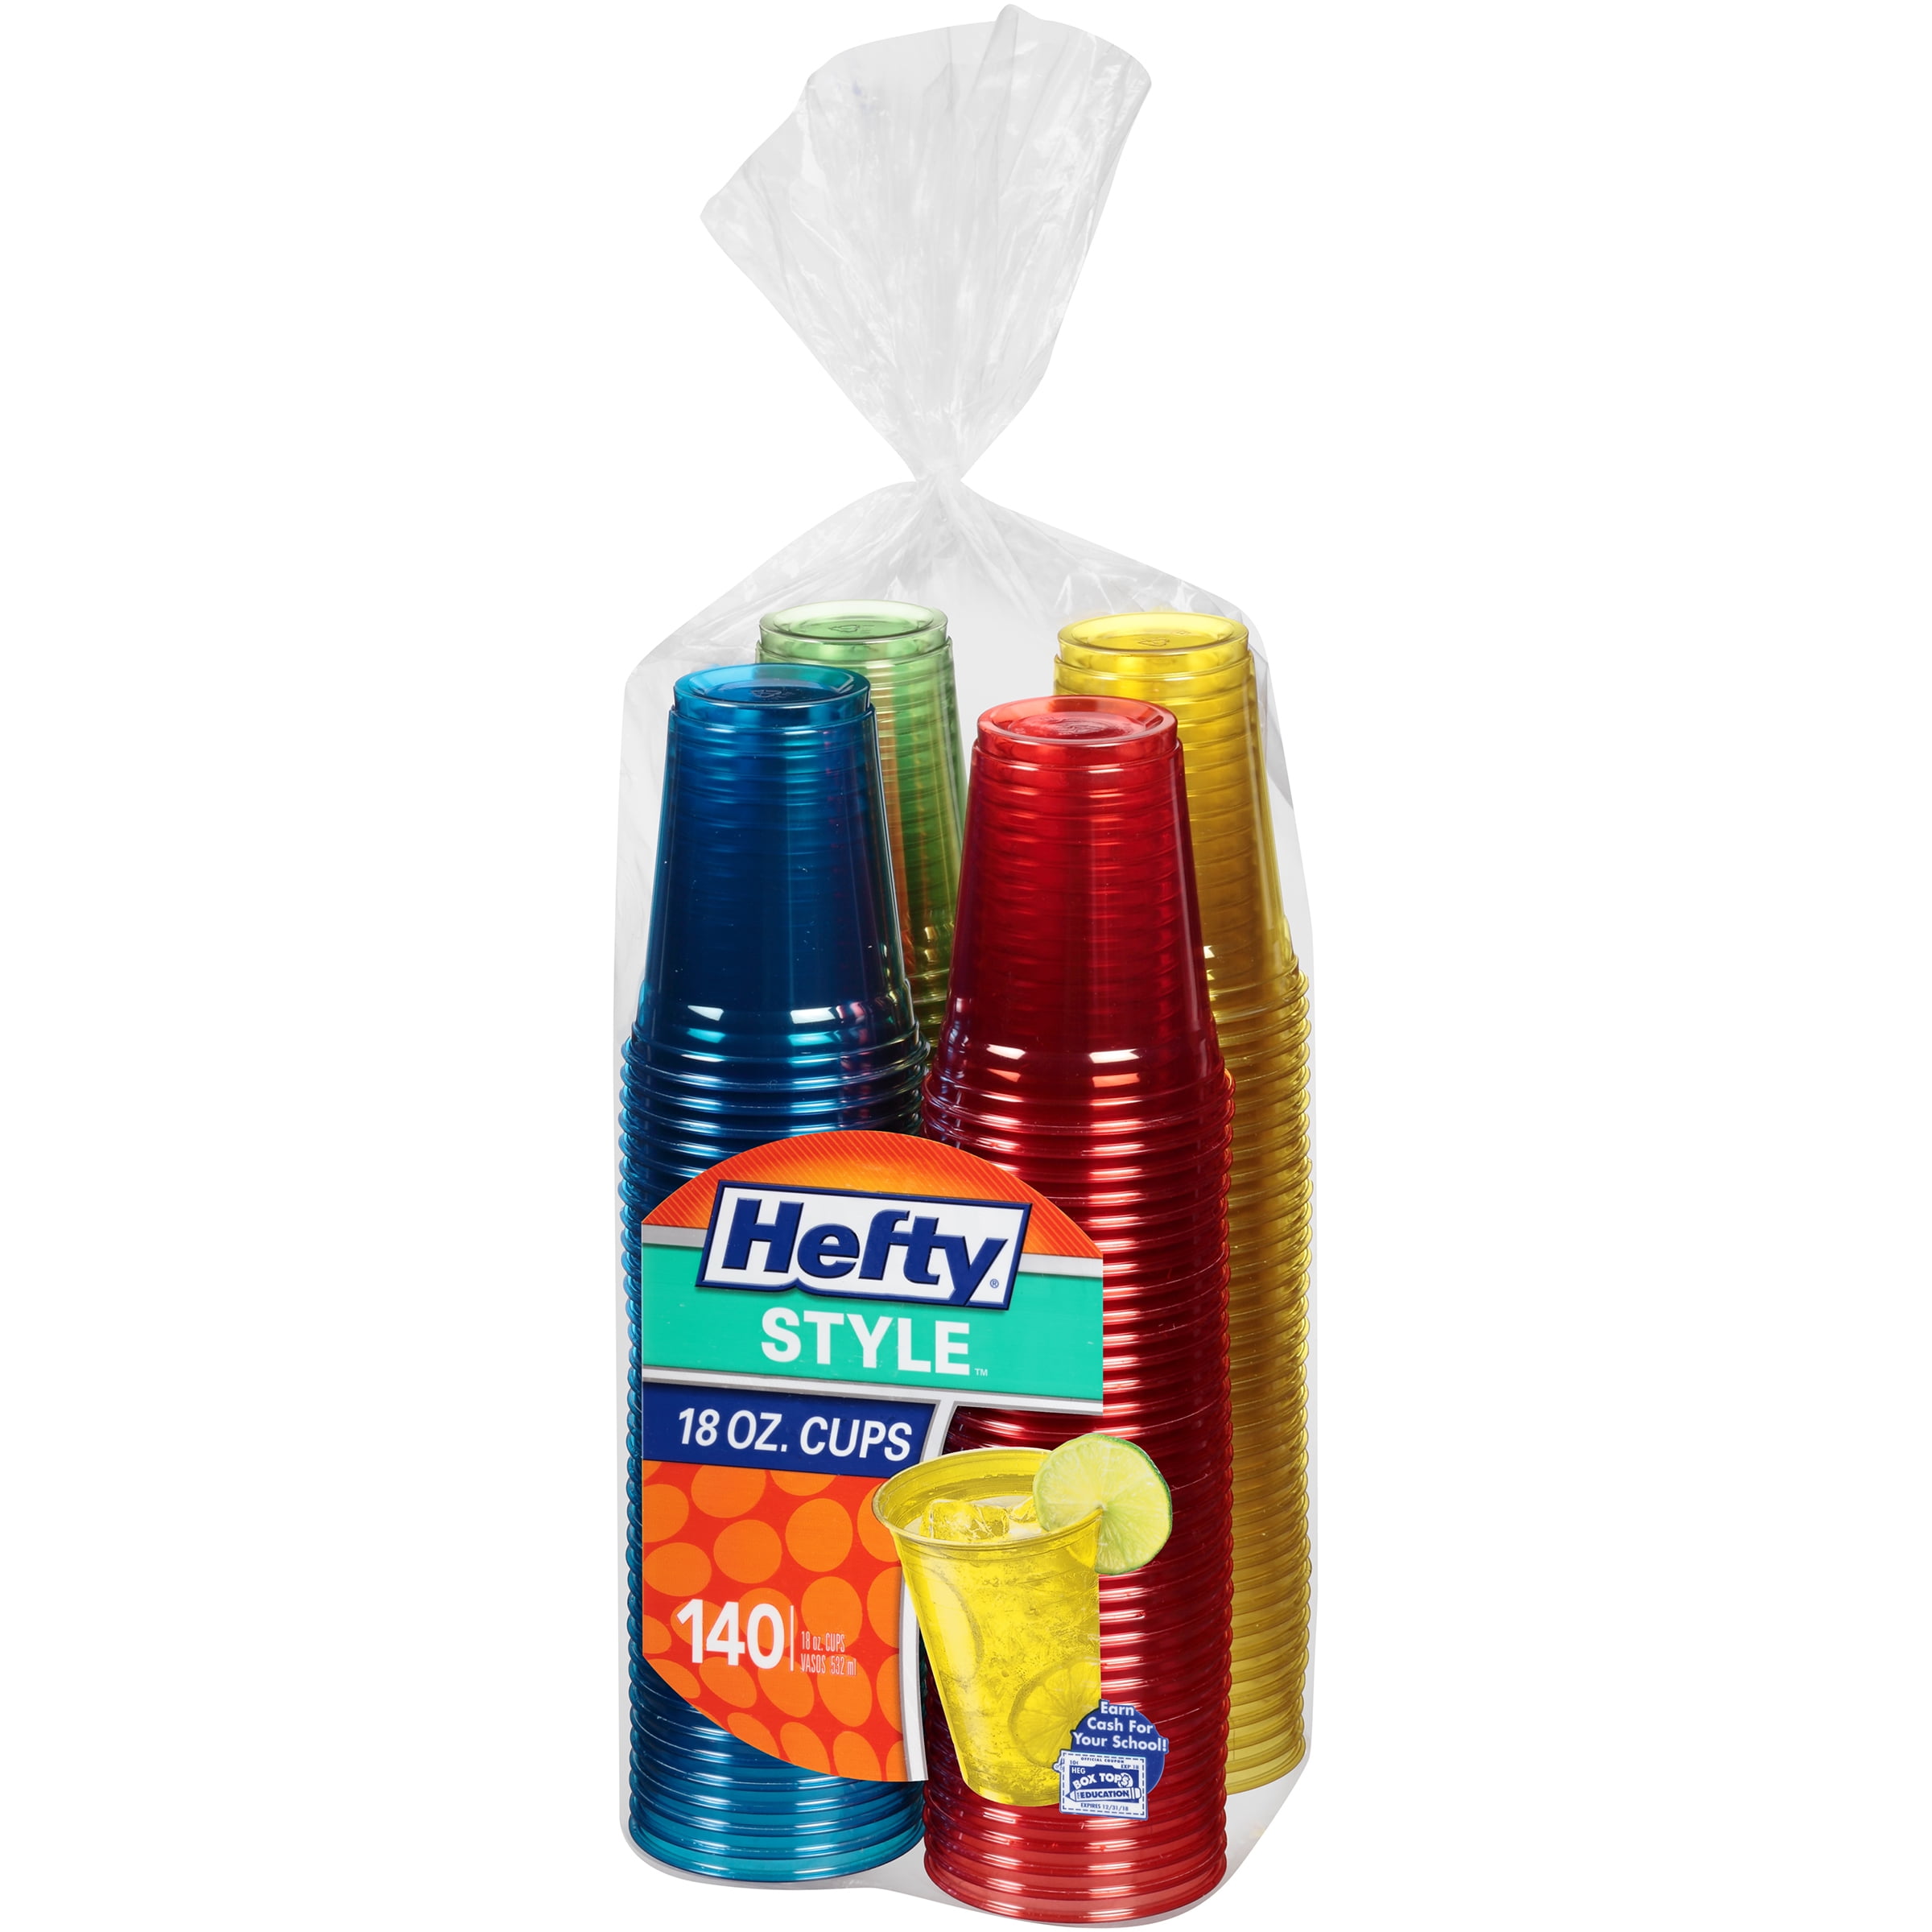 Hefty - Hefty, Party Perfect - Cups, 10 Ounce (36 count), Shop